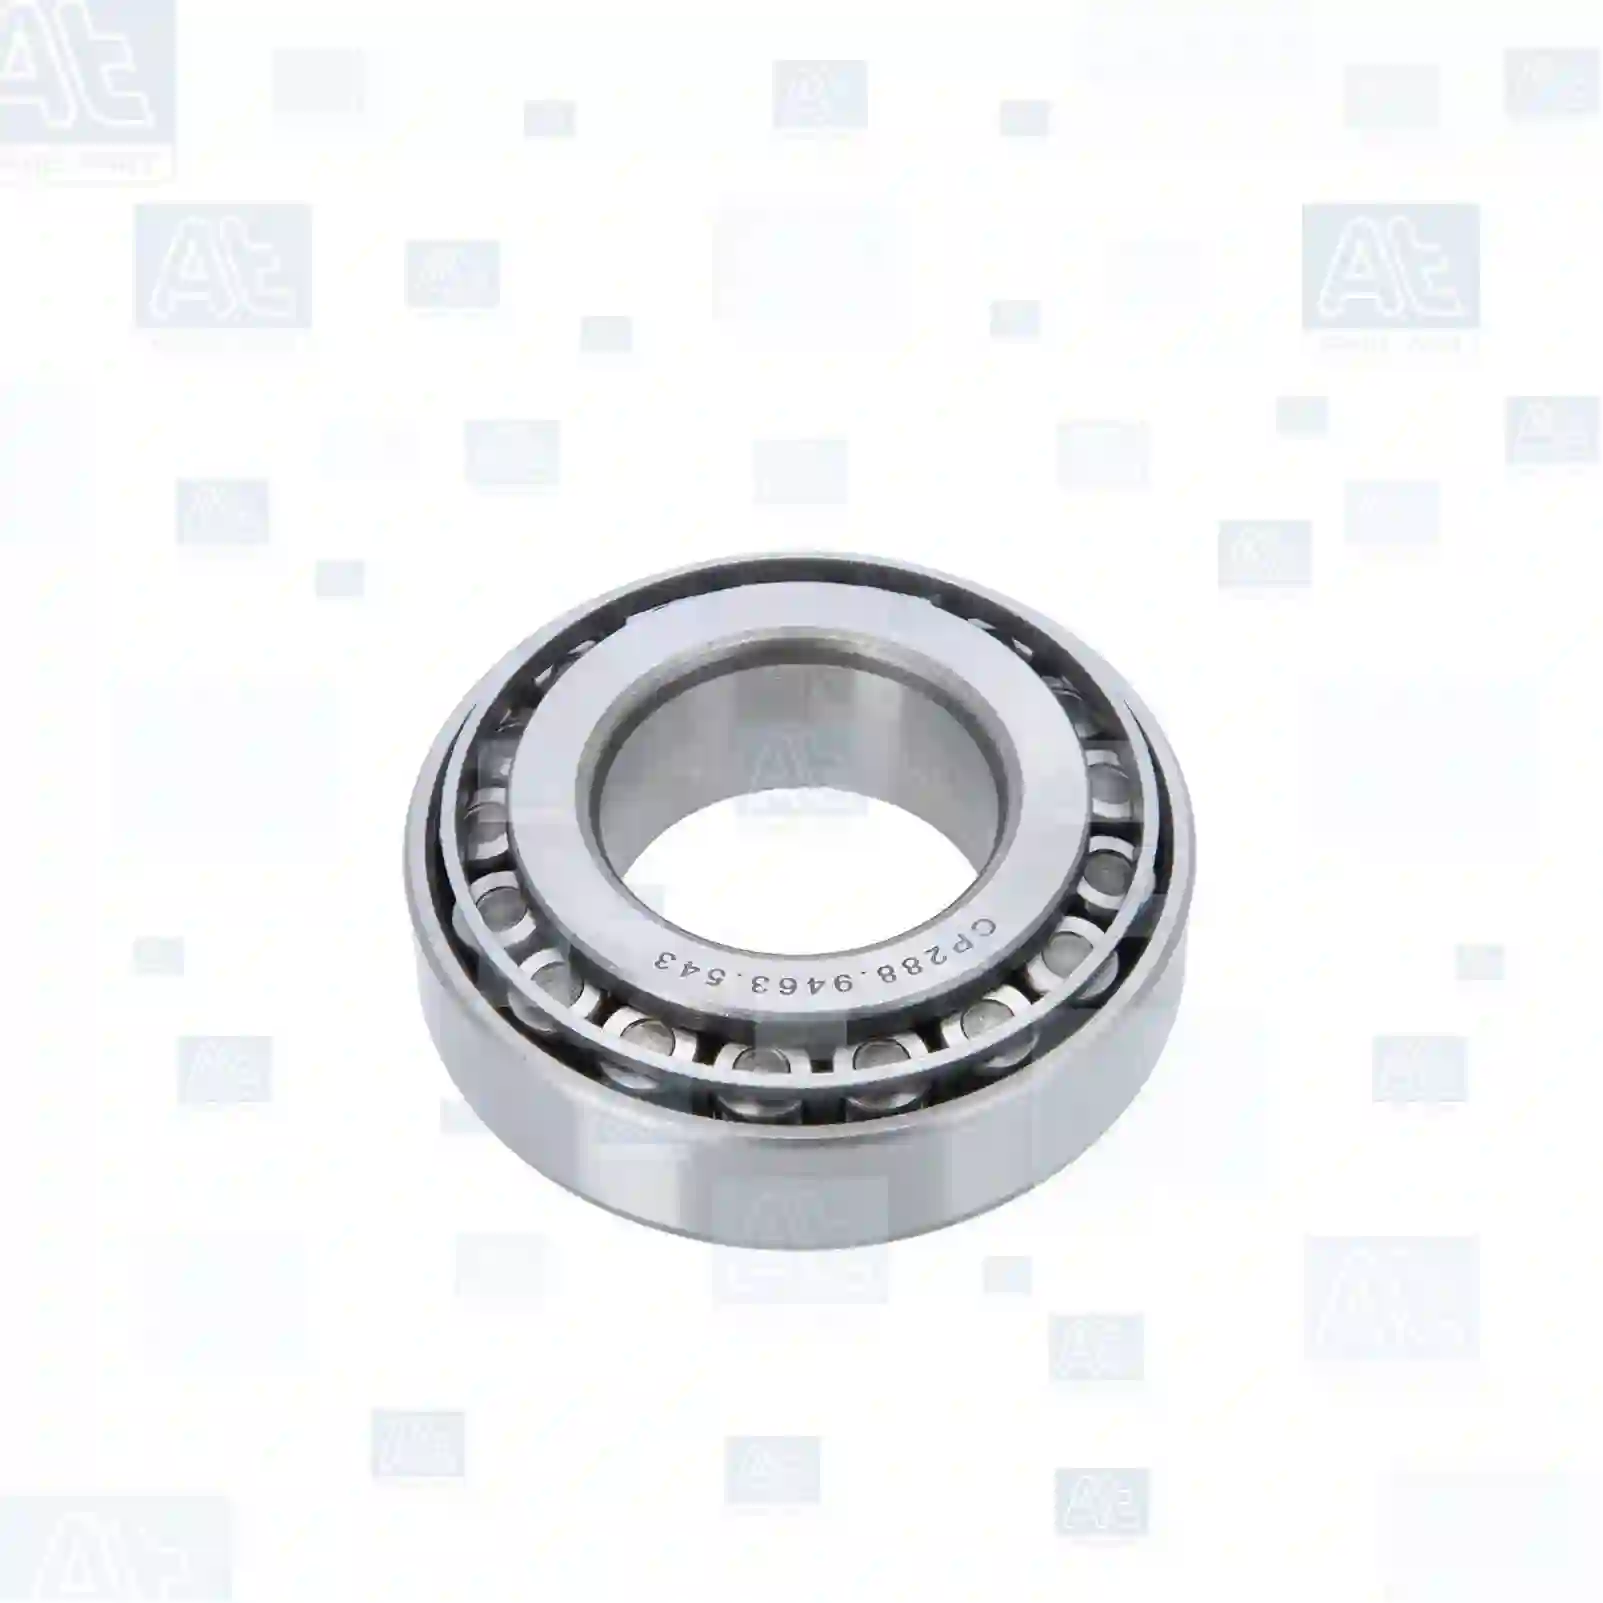 Tapered roller bearing, at no 77725069, oem no: 0014554, 14554, 0001440642X1, 004207725000, 005090157, 1440642X1, 4207725, TK4207725000, 01110002, 26800140, 10500474, 710500474, 8-94248078-0, 01110002, 07164502, 08560451, 08850841, 26800140, 3612944000, 503644293, 60144280, 93804619, 93806251, 823632208, 06324890080, 06324990062, 06324990063, 81934200055, 81934200246, 0039813805, 0039819405, 0159813405, 0159813805, 0159815605, 0169813505, 0169817205, MB025005, 40210-76000, 40210-9X60A, 0023432208, 0773220800, 0959232208, 5516014042, 5516014518, 5516014554, 214104, 183763, 7011093 At Spare Part | Engine, Accelerator Pedal, Camshaft, Connecting Rod, Crankcase, Crankshaft, Cylinder Head, Engine Suspension Mountings, Exhaust Manifold, Exhaust Gas Recirculation, Filter Kits, Flywheel Housing, General Overhaul Kits, Engine, Intake Manifold, Oil Cleaner, Oil Cooler, Oil Filter, Oil Pump, Oil Sump, Piston & Liner, Sensor & Switch, Timing Case, Turbocharger, Cooling System, Belt Tensioner, Coolant Filter, Coolant Pipe, Corrosion Prevention Agent, Drive, Expansion Tank, Fan, Intercooler, Monitors & Gauges, Radiator, Thermostat, V-Belt / Timing belt, Water Pump, Fuel System, Electronical Injector Unit, Feed Pump, Fuel Filter, cpl., Fuel Gauge Sender,  Fuel Line, Fuel Pump, Fuel Tank, Injection Line Kit, Injection Pump, Exhaust System, Clutch & Pedal, Gearbox, Propeller Shaft, Axles, Brake System, Hubs & Wheels, Suspension, Leaf Spring, Universal Parts / Accessories, Steering, Electrical System, Cabin Tapered roller bearing, at no 77725069, oem no: 0014554, 14554, 0001440642X1, 004207725000, 005090157, 1440642X1, 4207725, TK4207725000, 01110002, 26800140, 10500474, 710500474, 8-94248078-0, 01110002, 07164502, 08560451, 08850841, 26800140, 3612944000, 503644293, 60144280, 93804619, 93806251, 823632208, 06324890080, 06324990062, 06324990063, 81934200055, 81934200246, 0039813805, 0039819405, 0159813405, 0159813805, 0159815605, 0169813505, 0169817205, MB025005, 40210-76000, 40210-9X60A, 0023432208, 0773220800, 0959232208, 5516014042, 5516014518, 5516014554, 214104, 183763, 7011093 At Spare Part | Engine, Accelerator Pedal, Camshaft, Connecting Rod, Crankcase, Crankshaft, Cylinder Head, Engine Suspension Mountings, Exhaust Manifold, Exhaust Gas Recirculation, Filter Kits, Flywheel Housing, General Overhaul Kits, Engine, Intake Manifold, Oil Cleaner, Oil Cooler, Oil Filter, Oil Pump, Oil Sump, Piston & Liner, Sensor & Switch, Timing Case, Turbocharger, Cooling System, Belt Tensioner, Coolant Filter, Coolant Pipe, Corrosion Prevention Agent, Drive, Expansion Tank, Fan, Intercooler, Monitors & Gauges, Radiator, Thermostat, V-Belt / Timing belt, Water Pump, Fuel System, Electronical Injector Unit, Feed Pump, Fuel Filter, cpl., Fuel Gauge Sender,  Fuel Line, Fuel Pump, Fuel Tank, Injection Line Kit, Injection Pump, Exhaust System, Clutch & Pedal, Gearbox, Propeller Shaft, Axles, Brake System, Hubs & Wheels, Suspension, Leaf Spring, Universal Parts / Accessories, Steering, Electrical System, Cabin